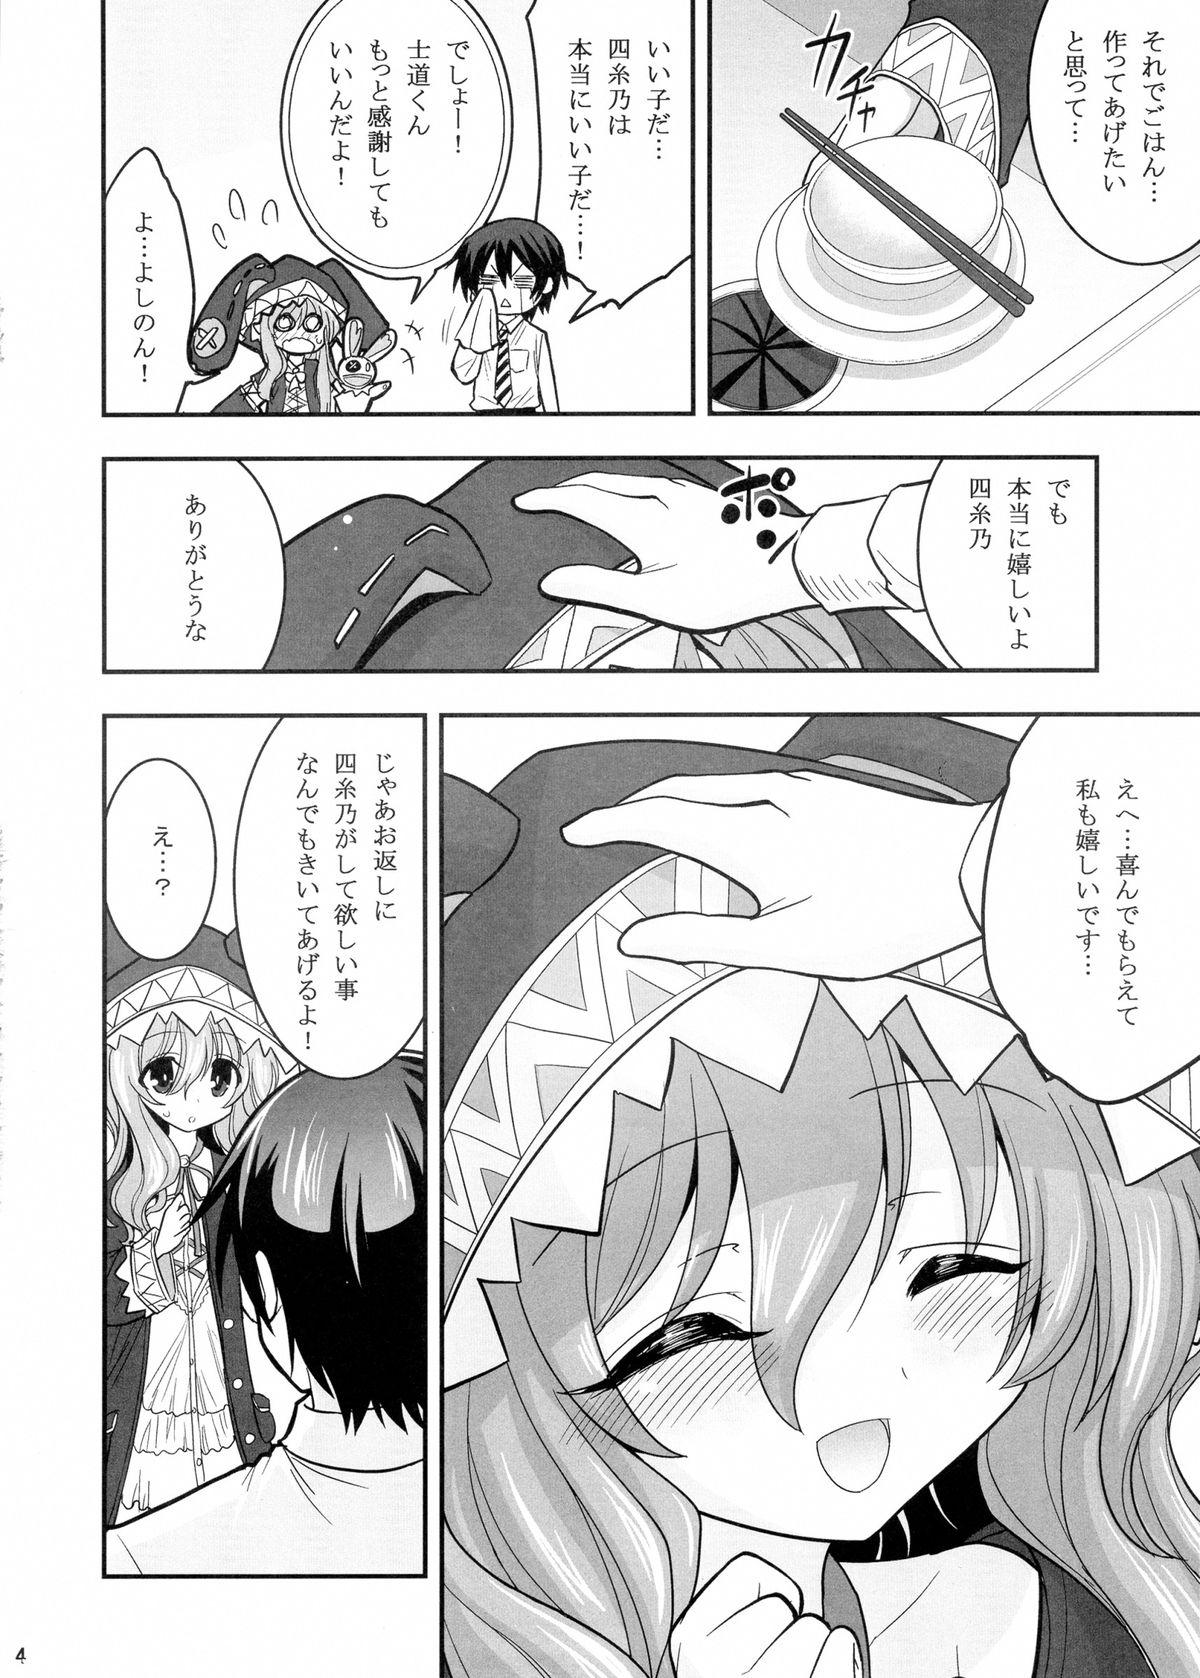 Goldenshower Yoshino Date After - Date a live Hymen - Page 4